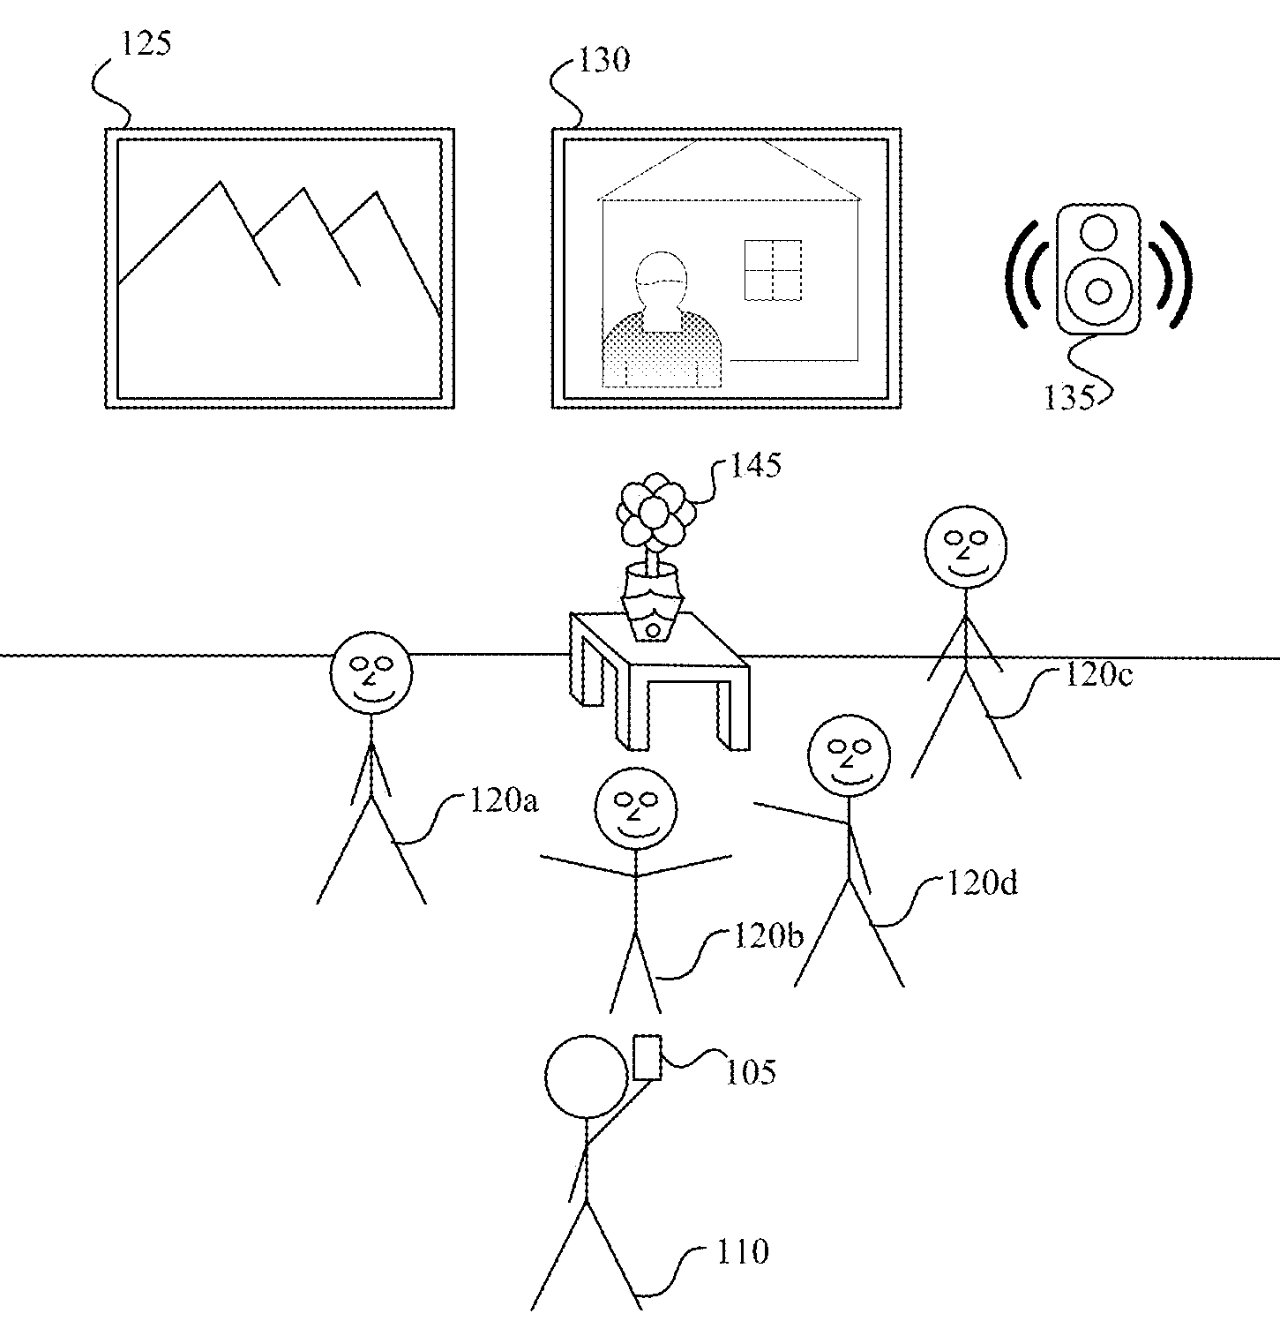 Detail from the patent application showing an Apple party.